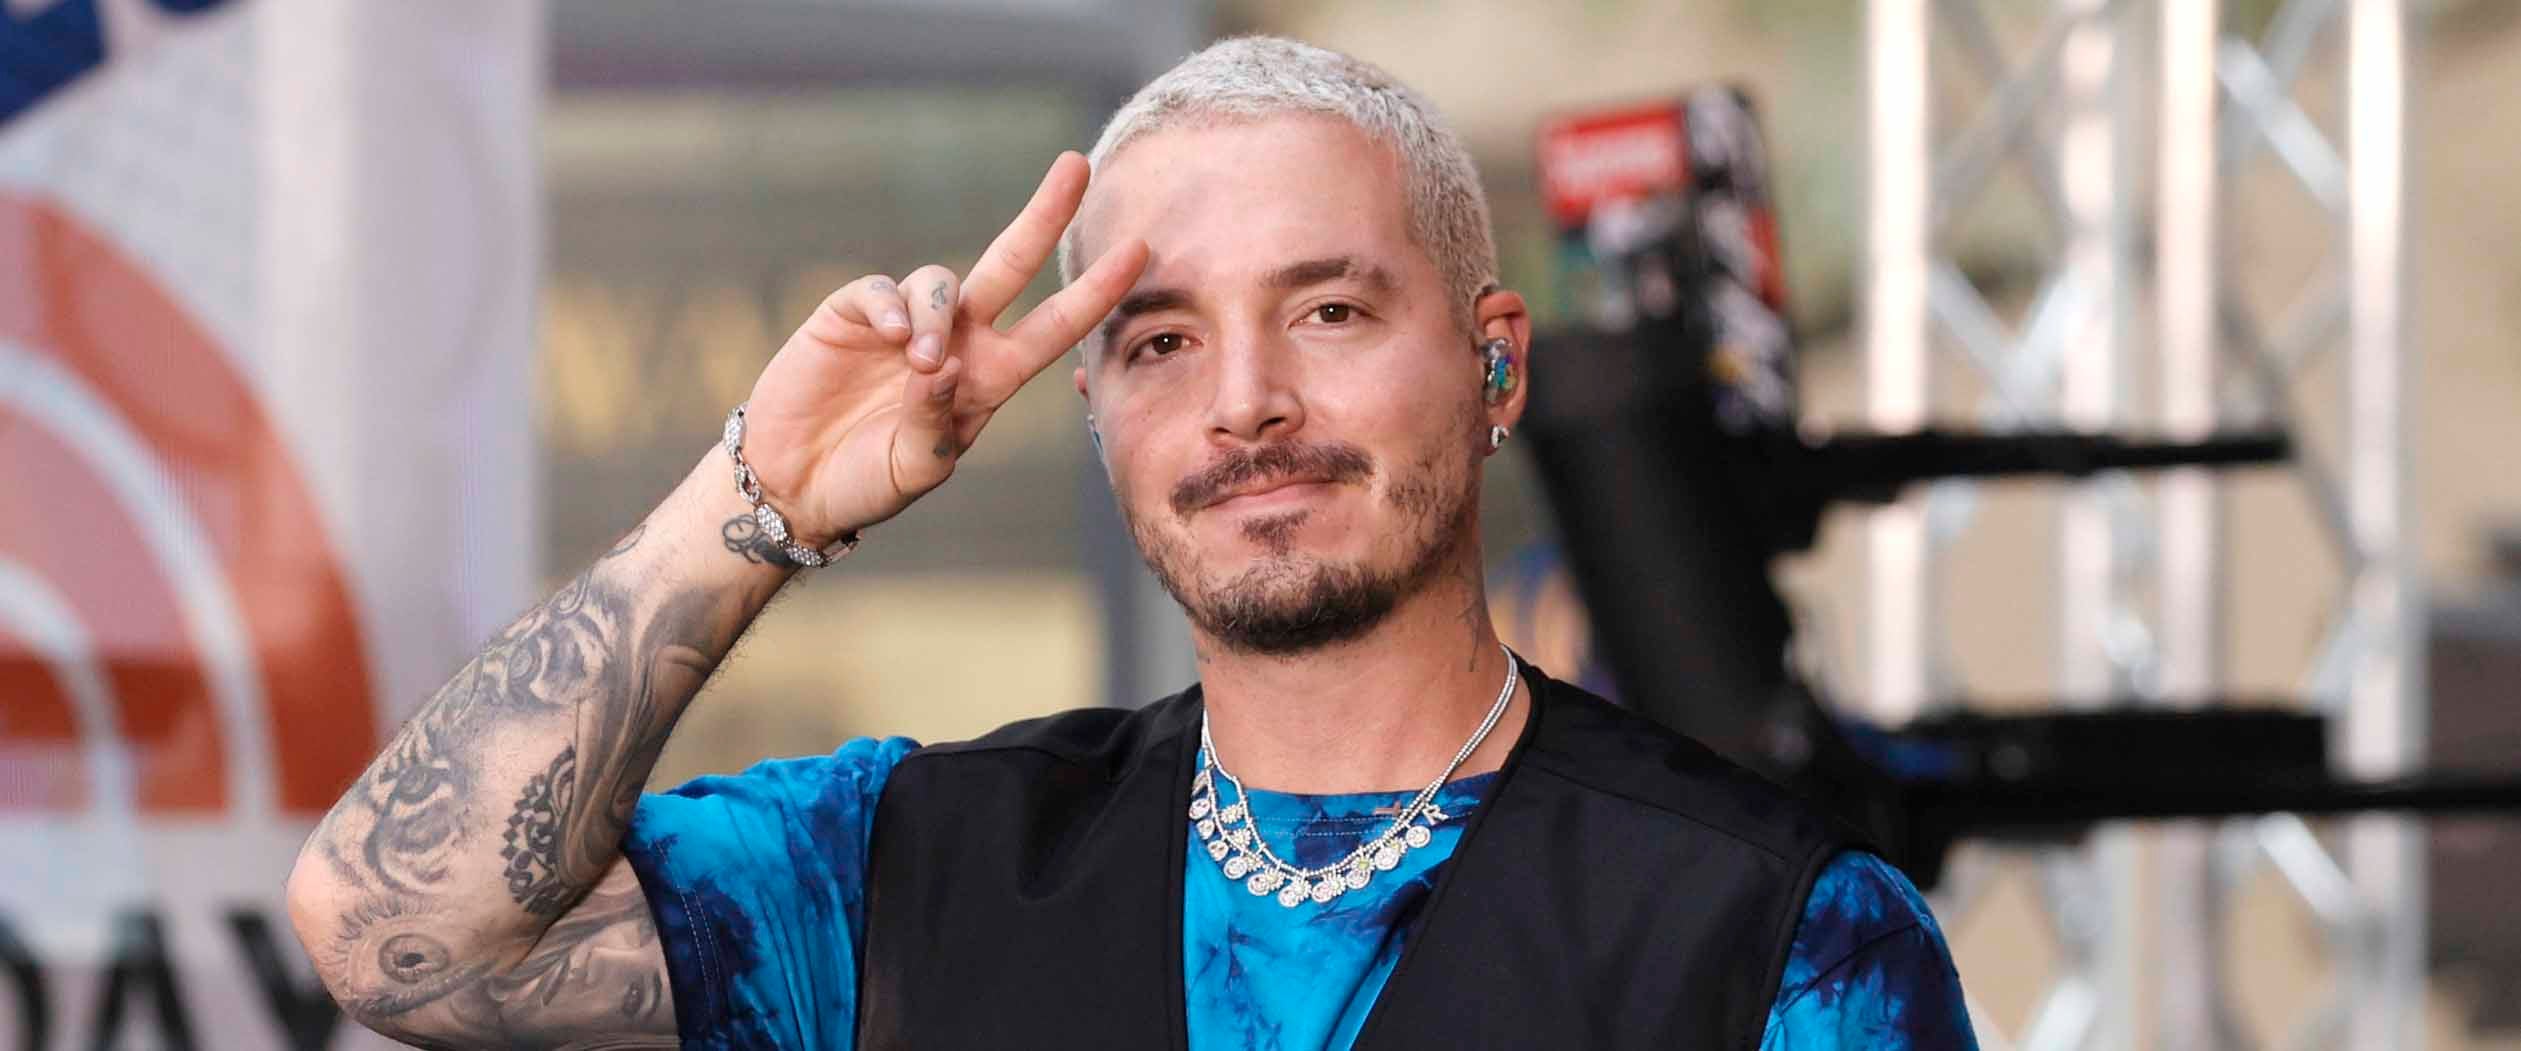 J Balvin is the new face of an old tradition: Black erasure in